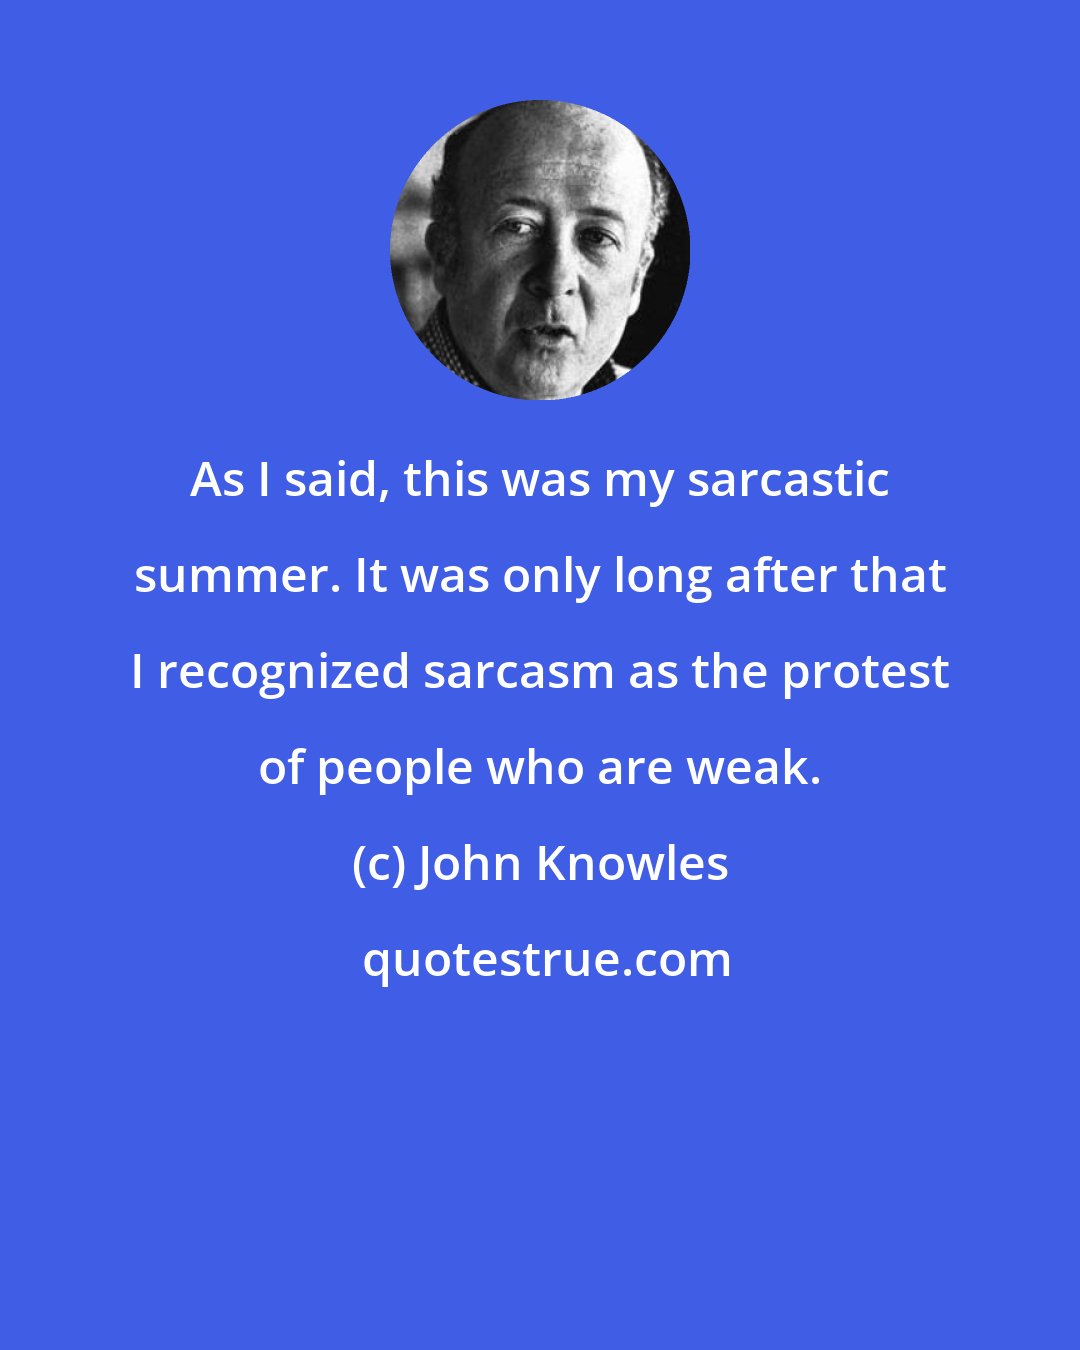 John Knowles: As I said, this was my sarcastic summer. It was only long after that I recognized sarcasm as the protest of people who are weak.